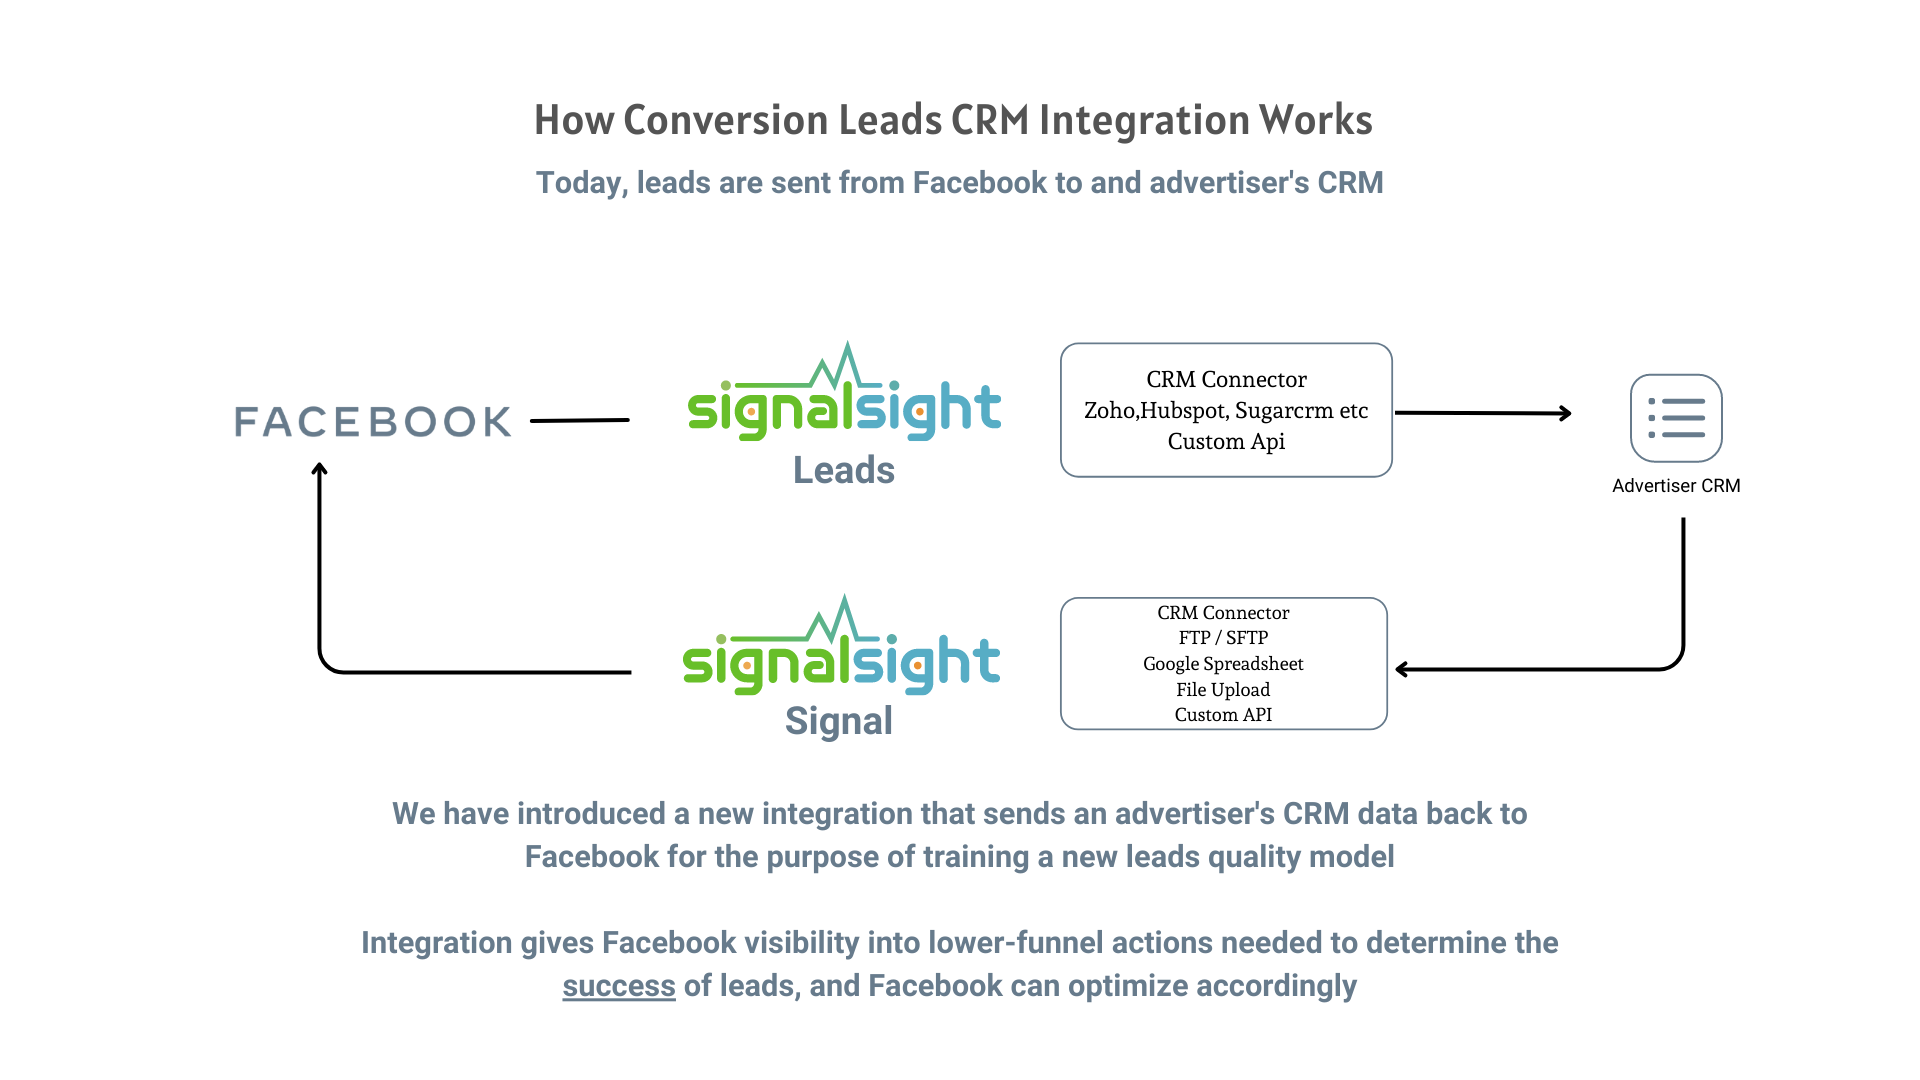 Conversion Leads Guide